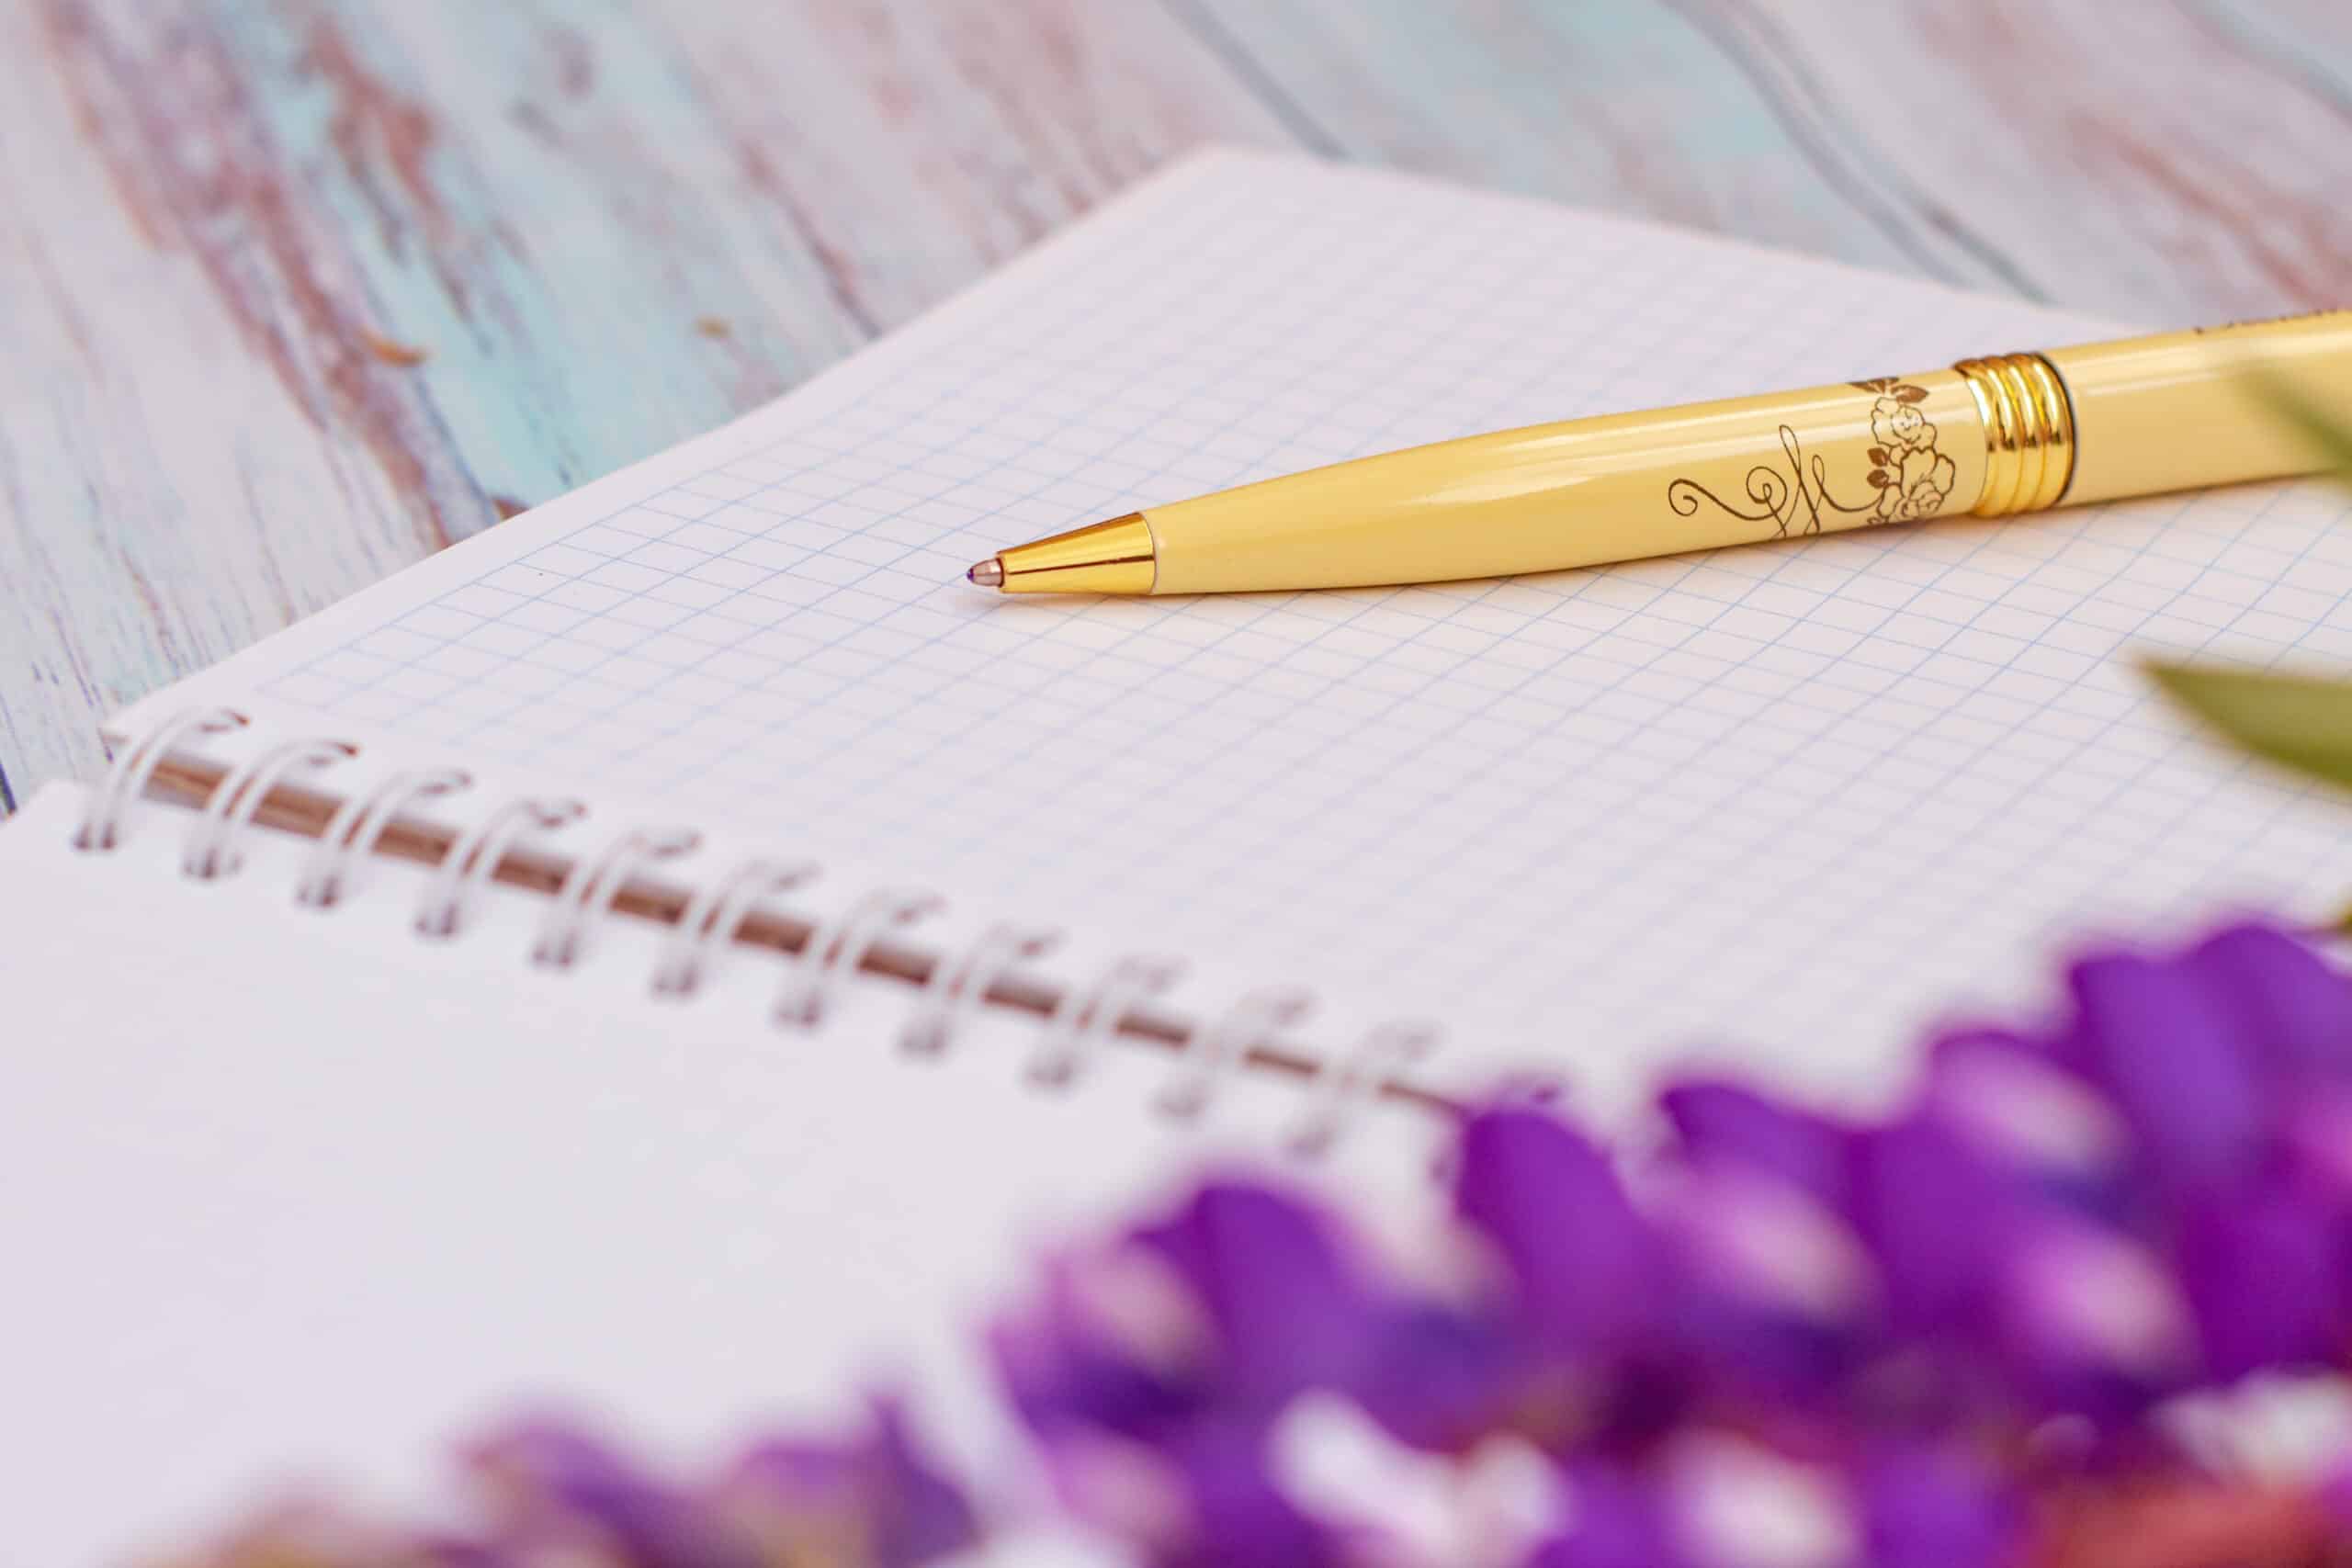 Notebook with a yellow pen, next to purple flowers.